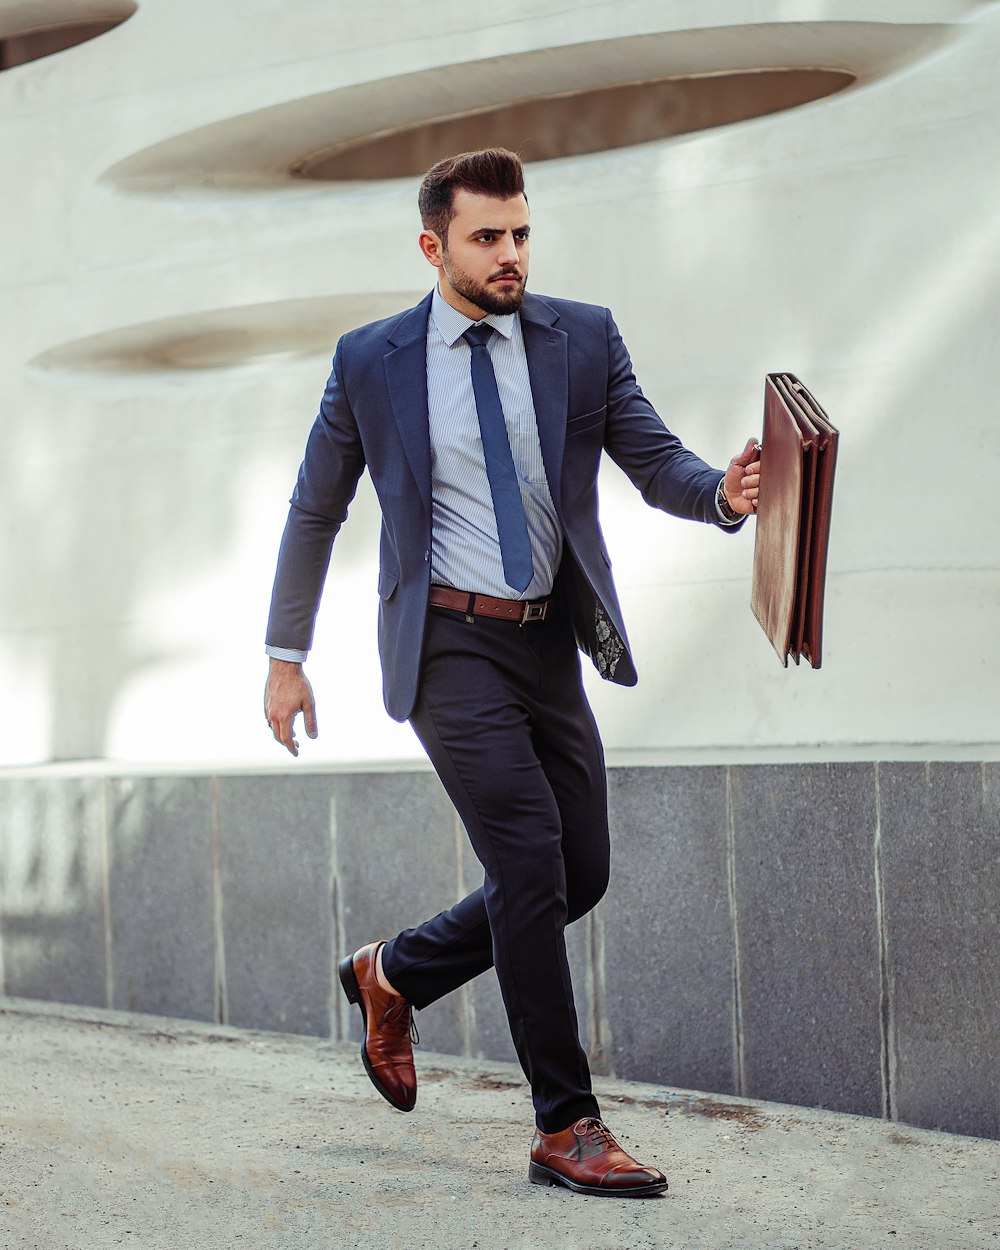 Man in blue dress shirt and black pants standing on gray concrete stairs  photo – Free استان تهران، ایران Image on Unsplash